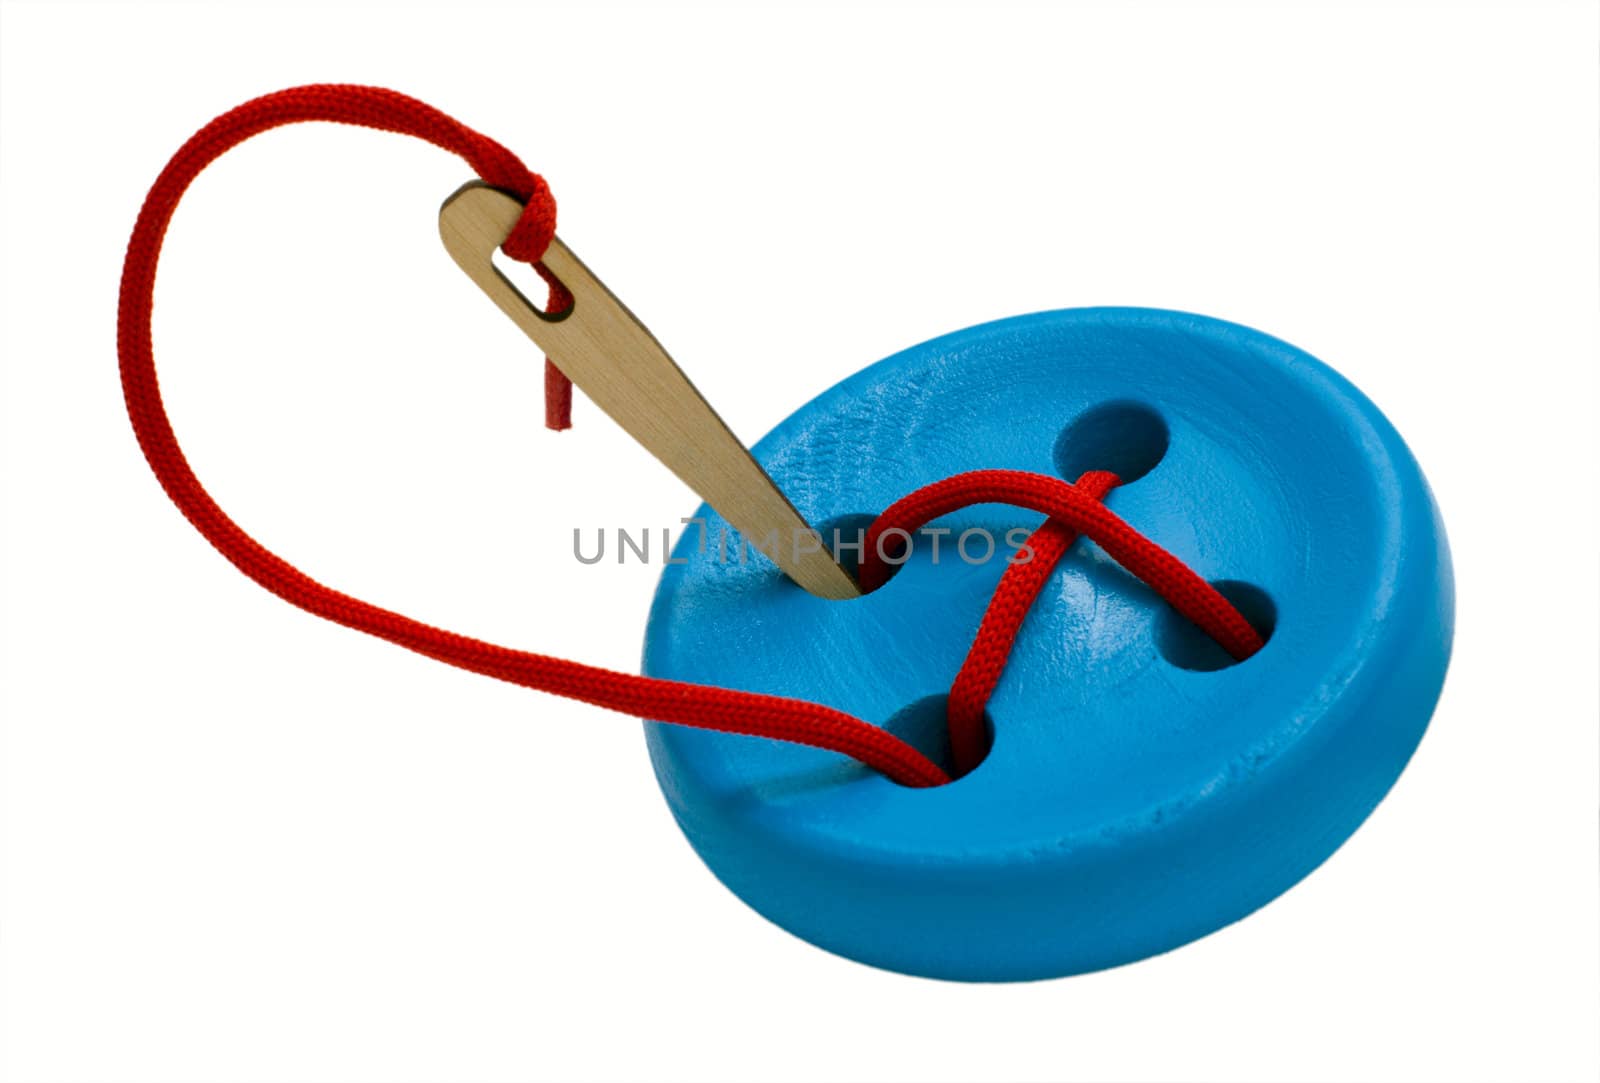 Button with needle for training fine motor skills